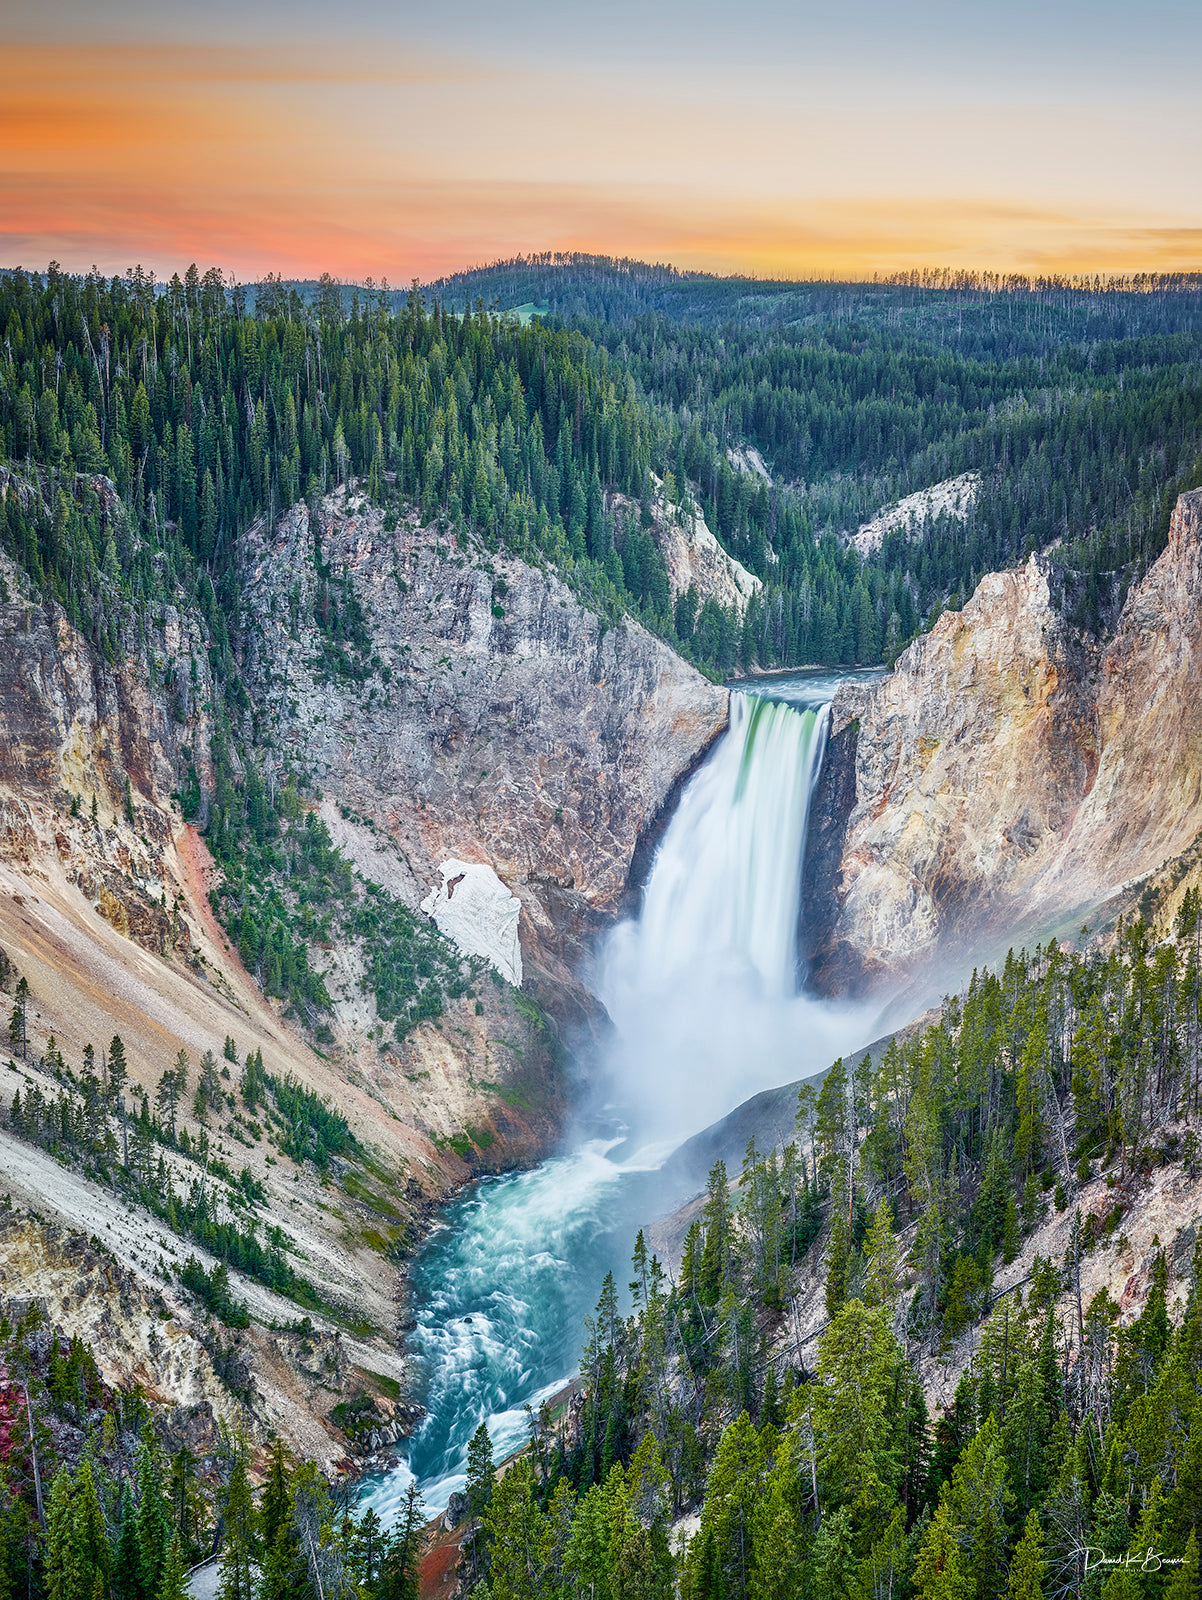 Waterfall in the middle of Yellowstone.